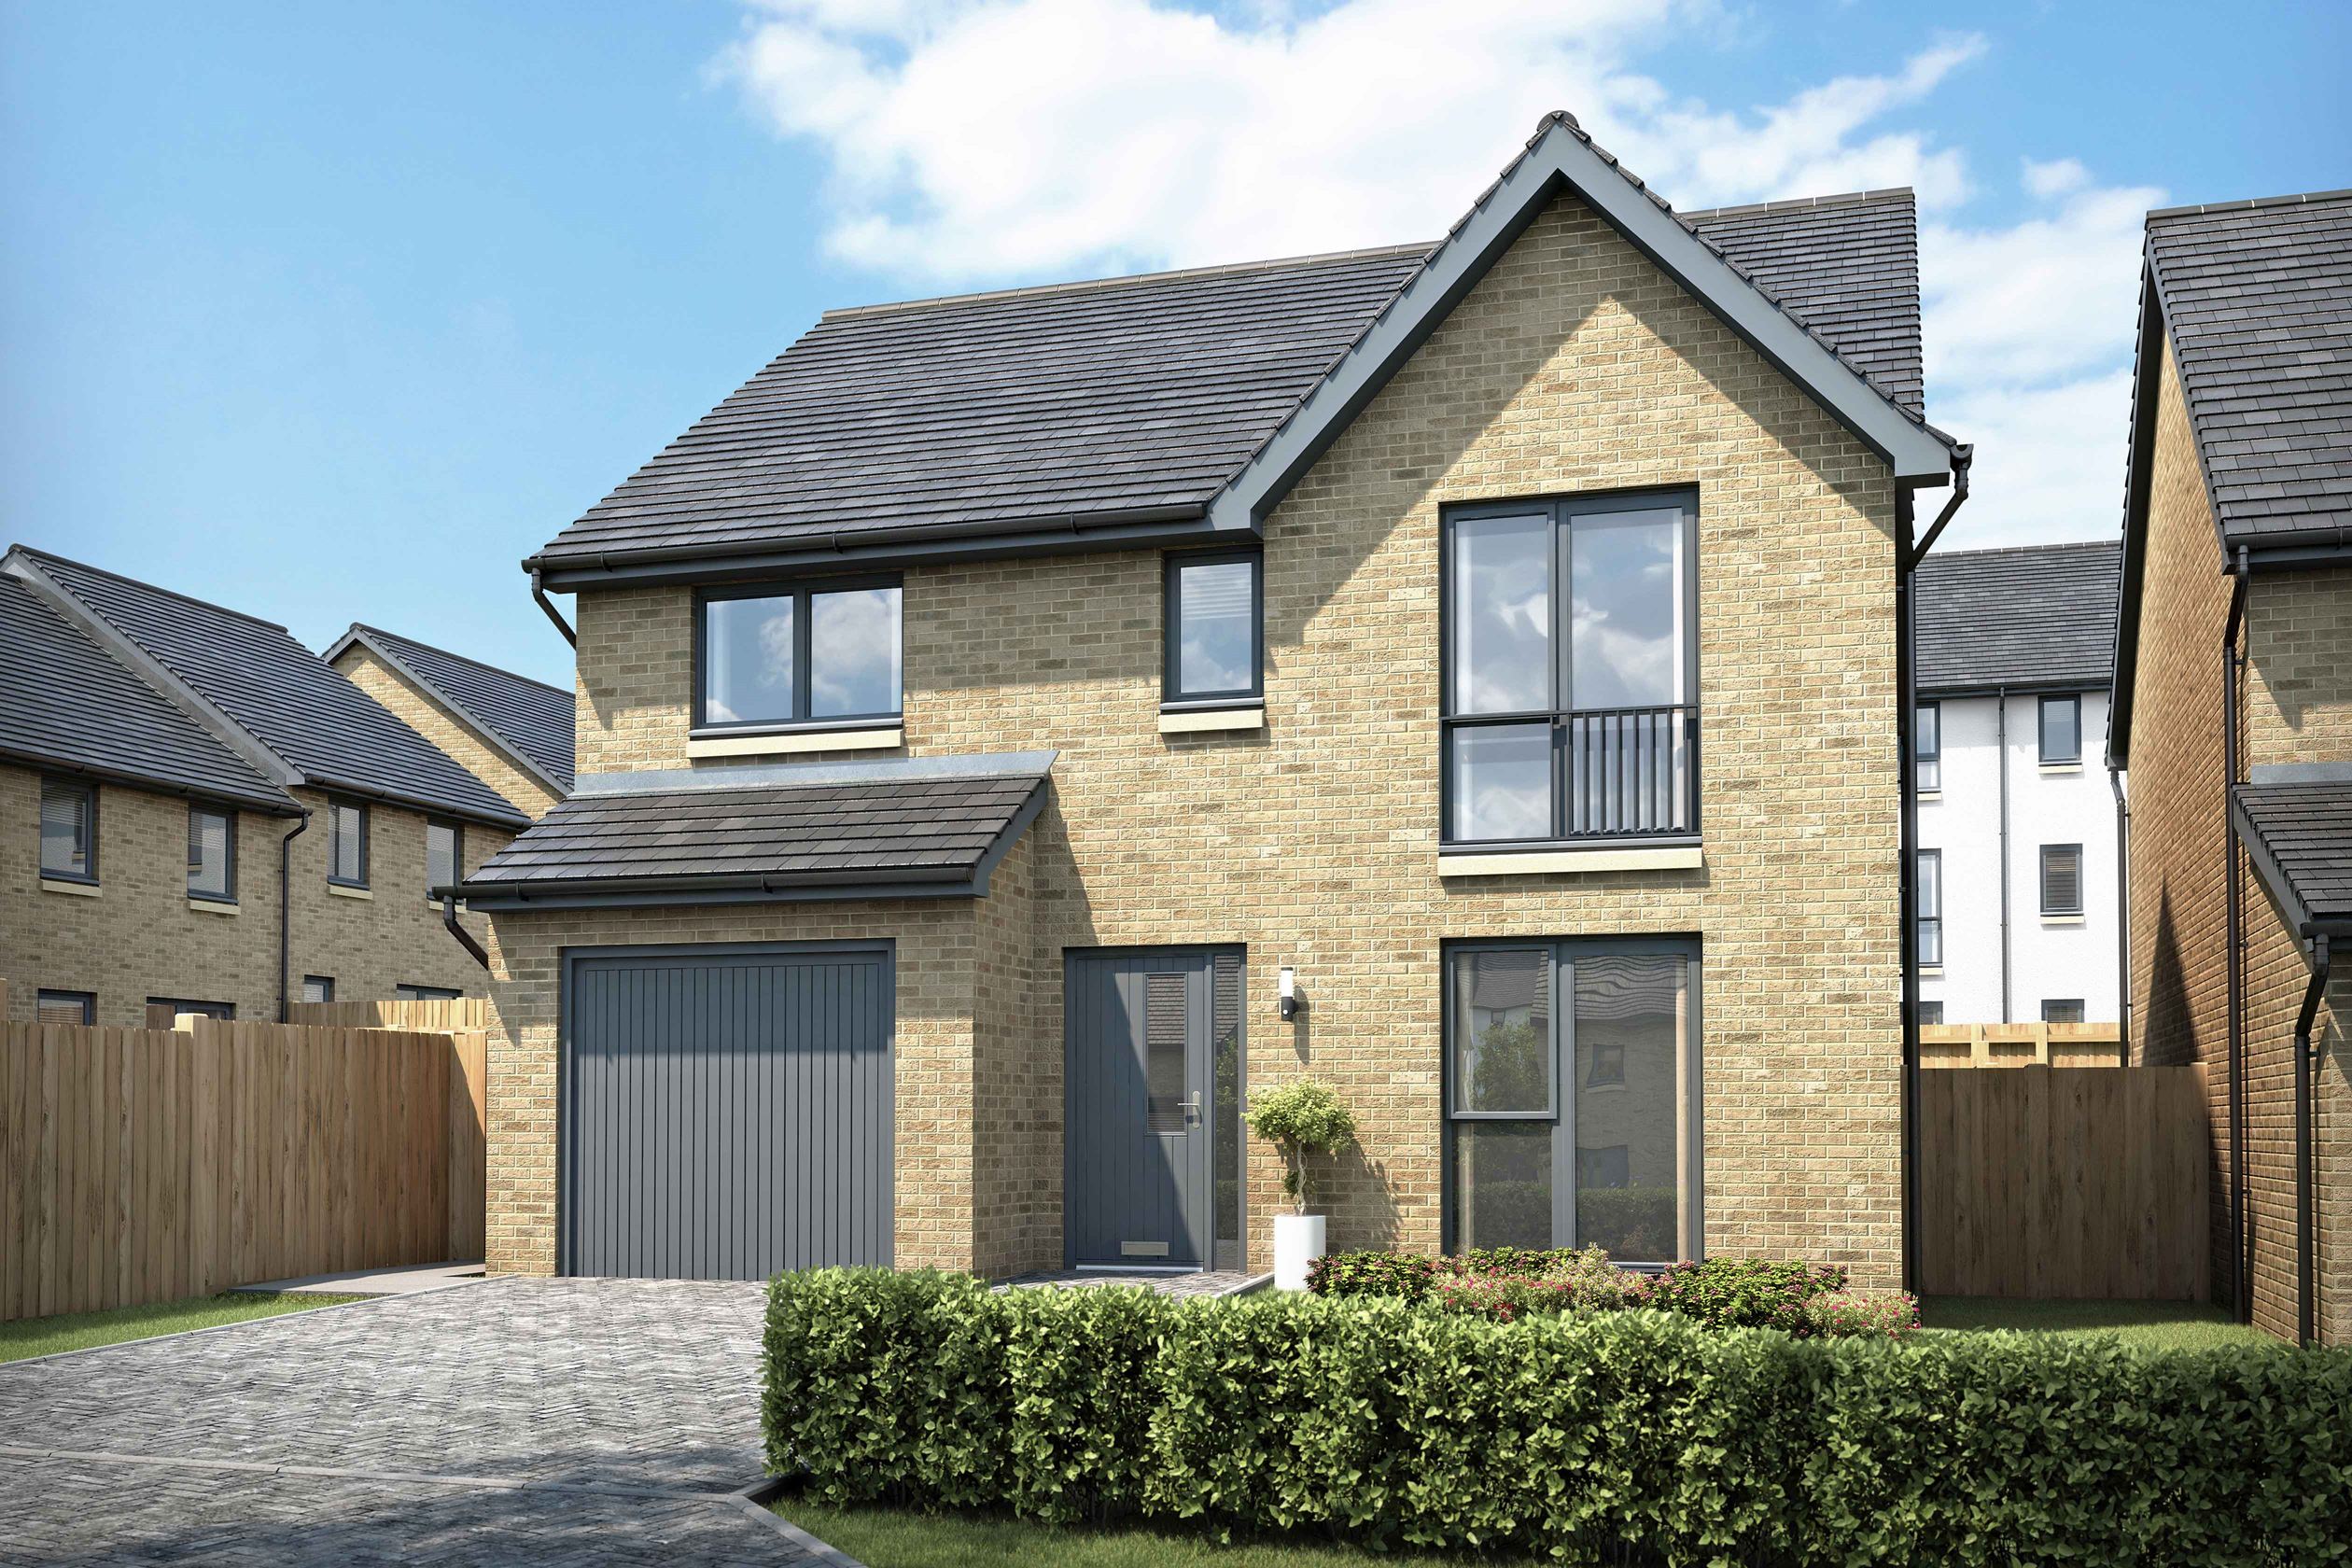 Property 1 of 10. Image Of Kinghorn House Type At Cammo Meadows